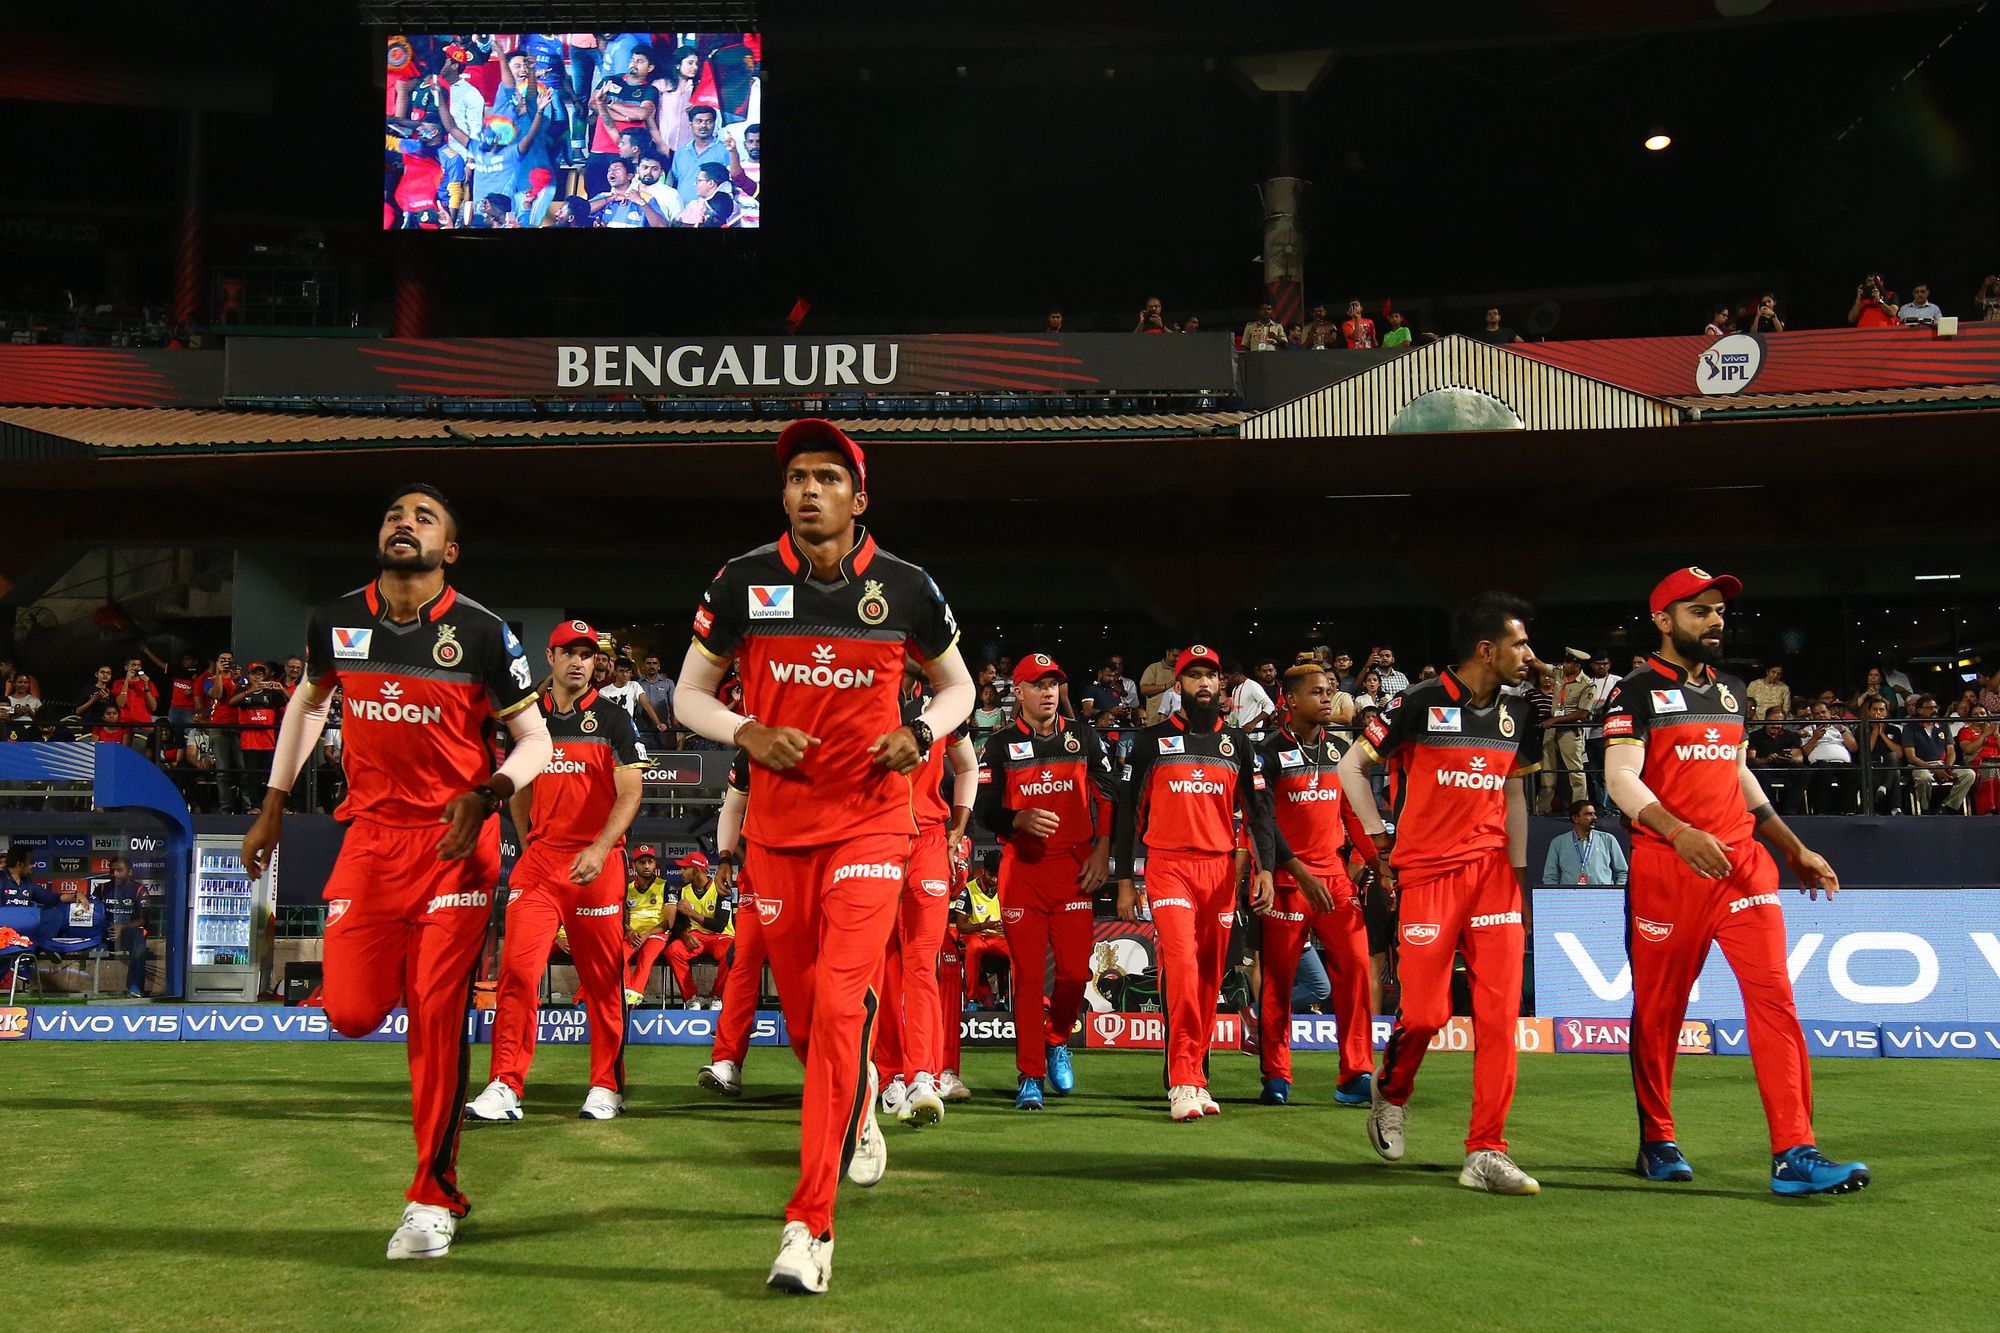 The Royal Challengers Bangalore are one of the most popular IPL franchises | Twitter